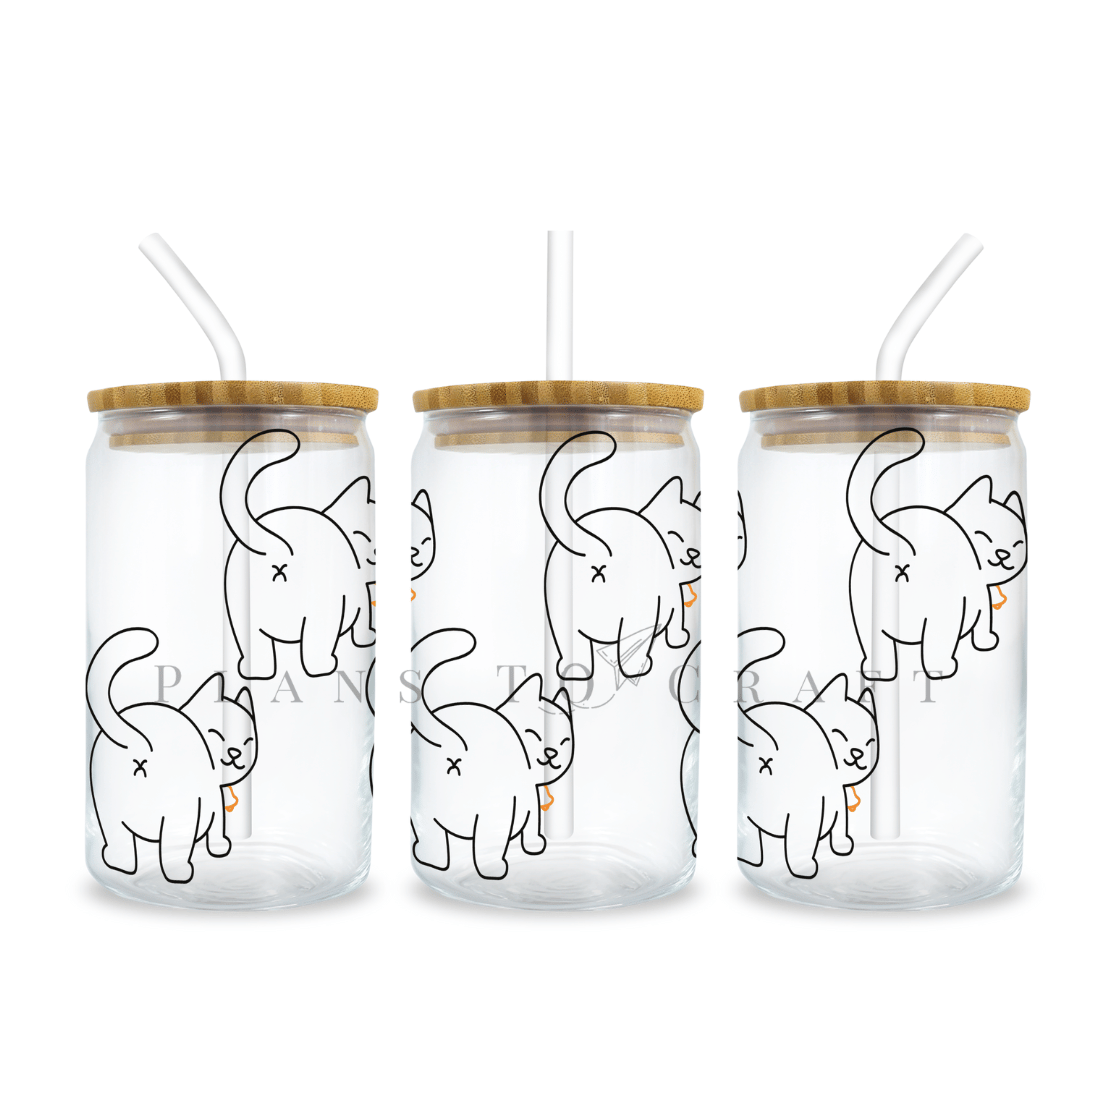 Layering Vinyl on a Libbey Glass Beer Can + Free Wrap Design 